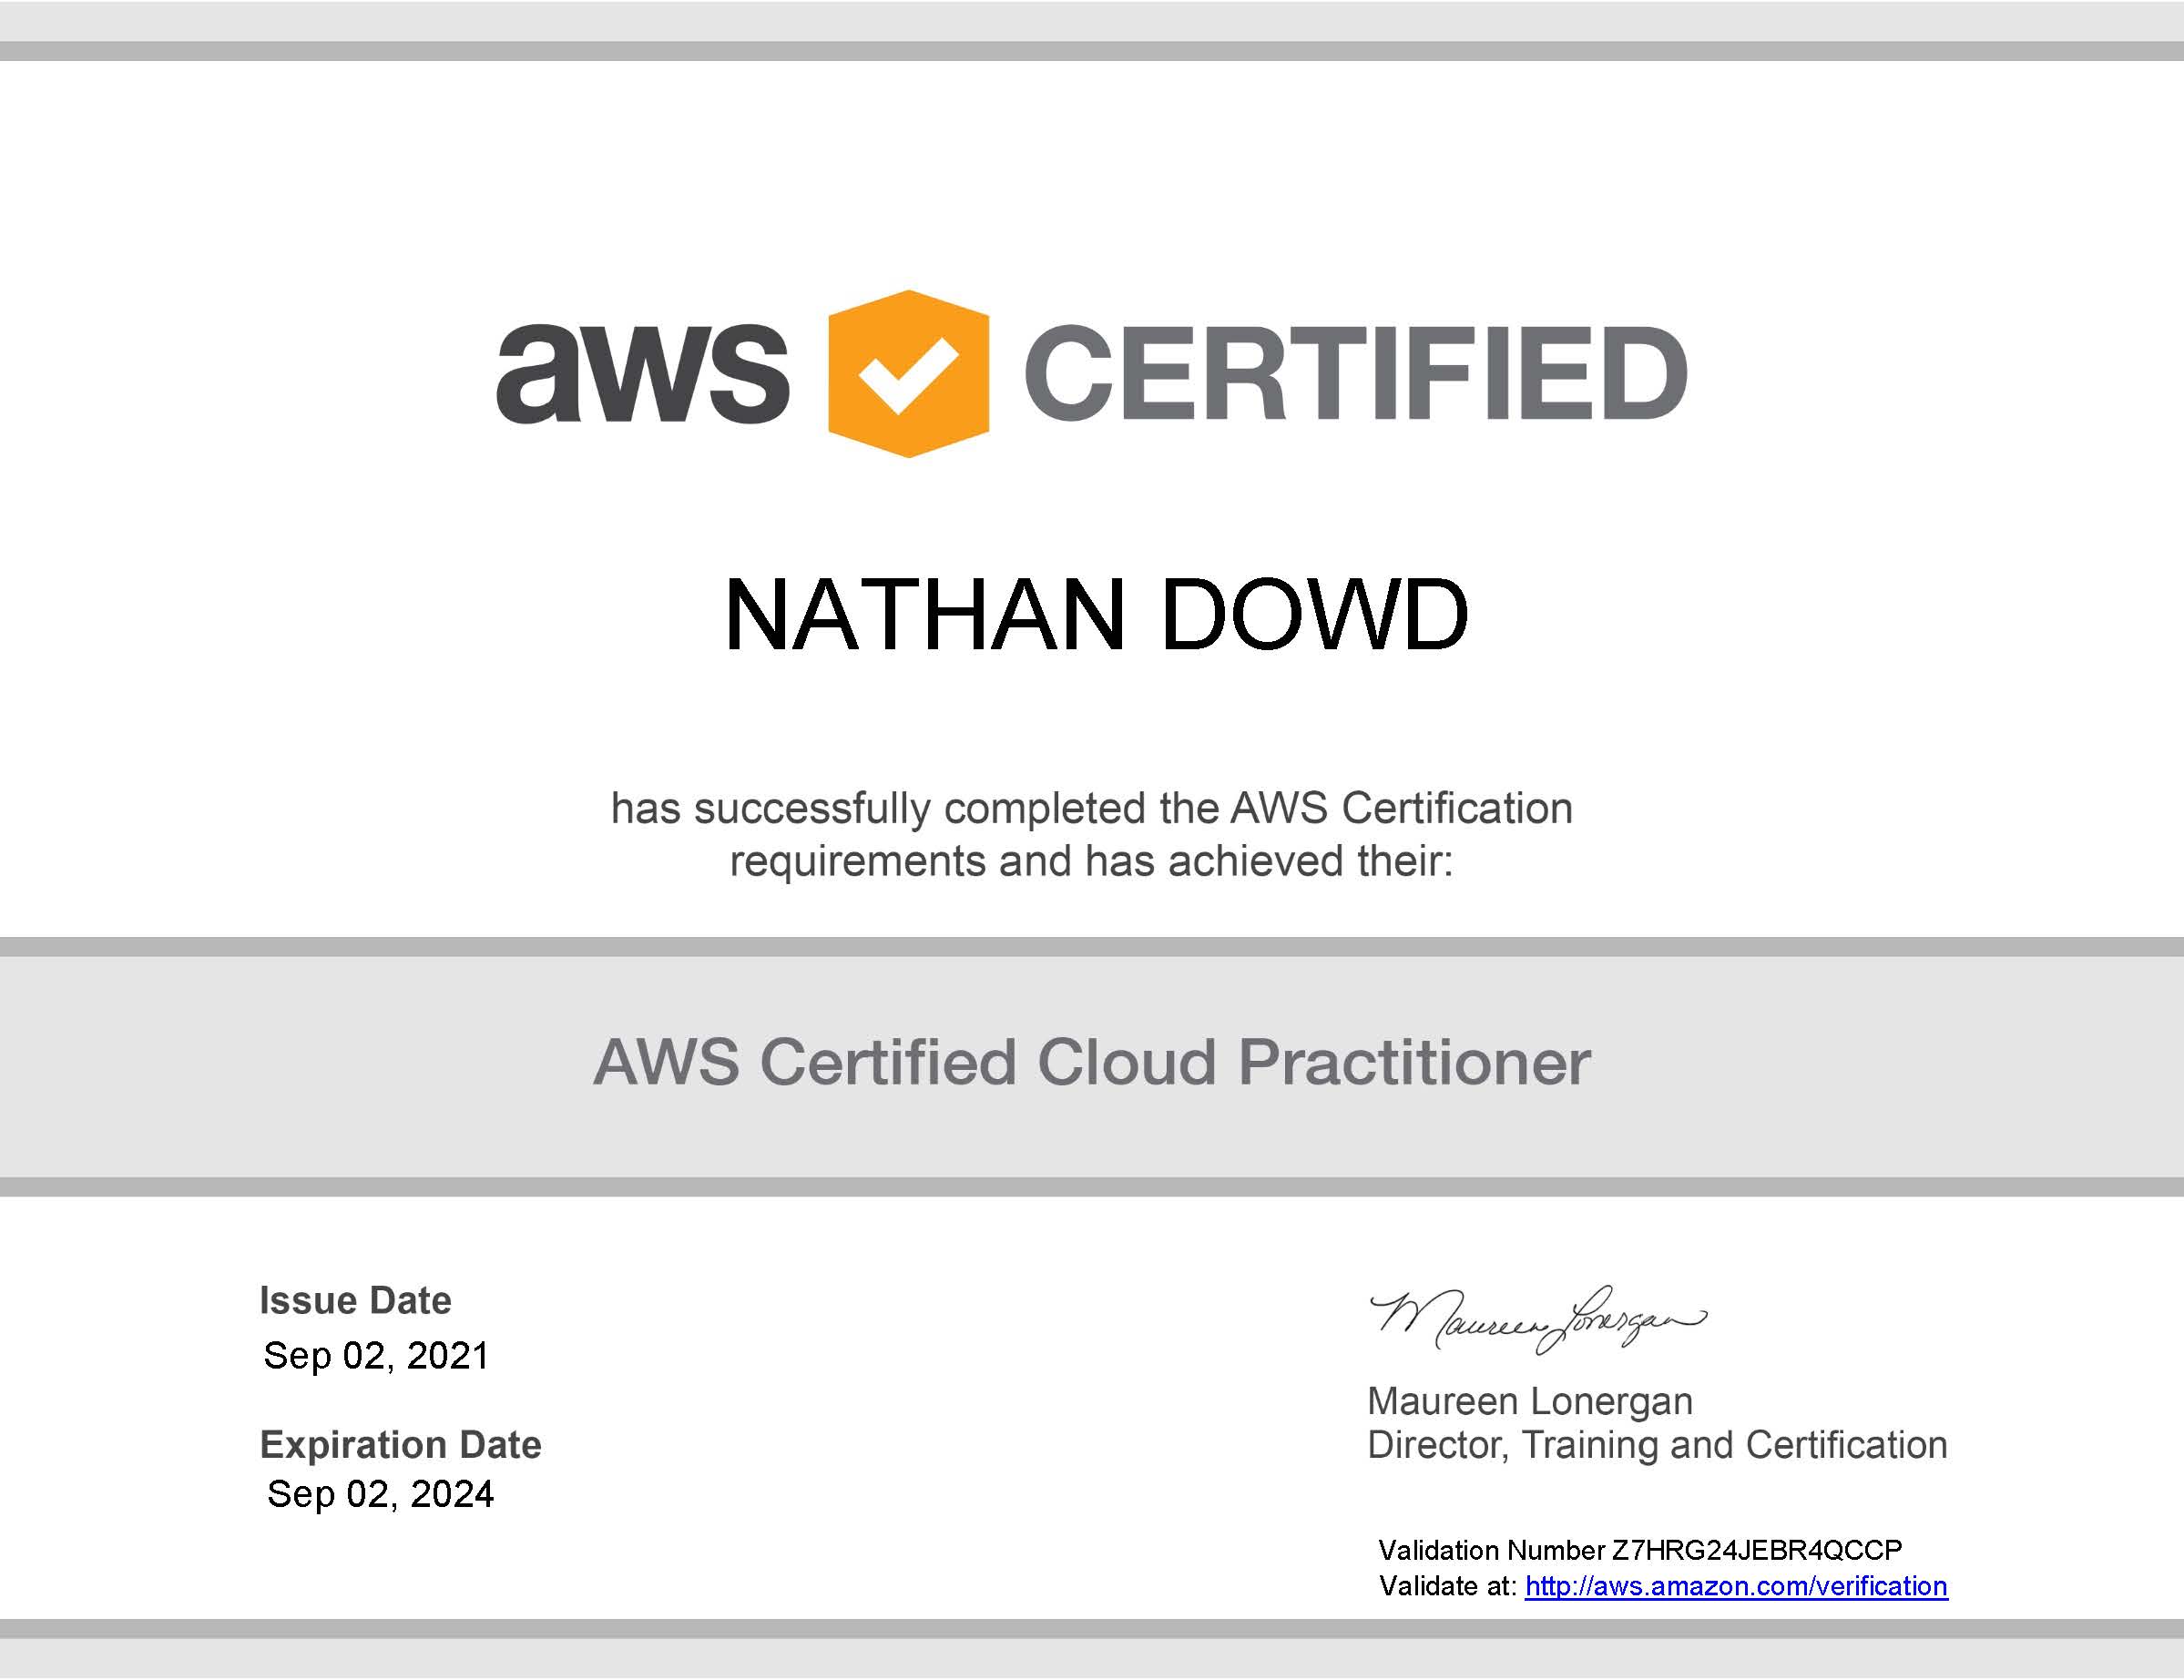 AWS Certified Cloud Practitioner nathandowd tech